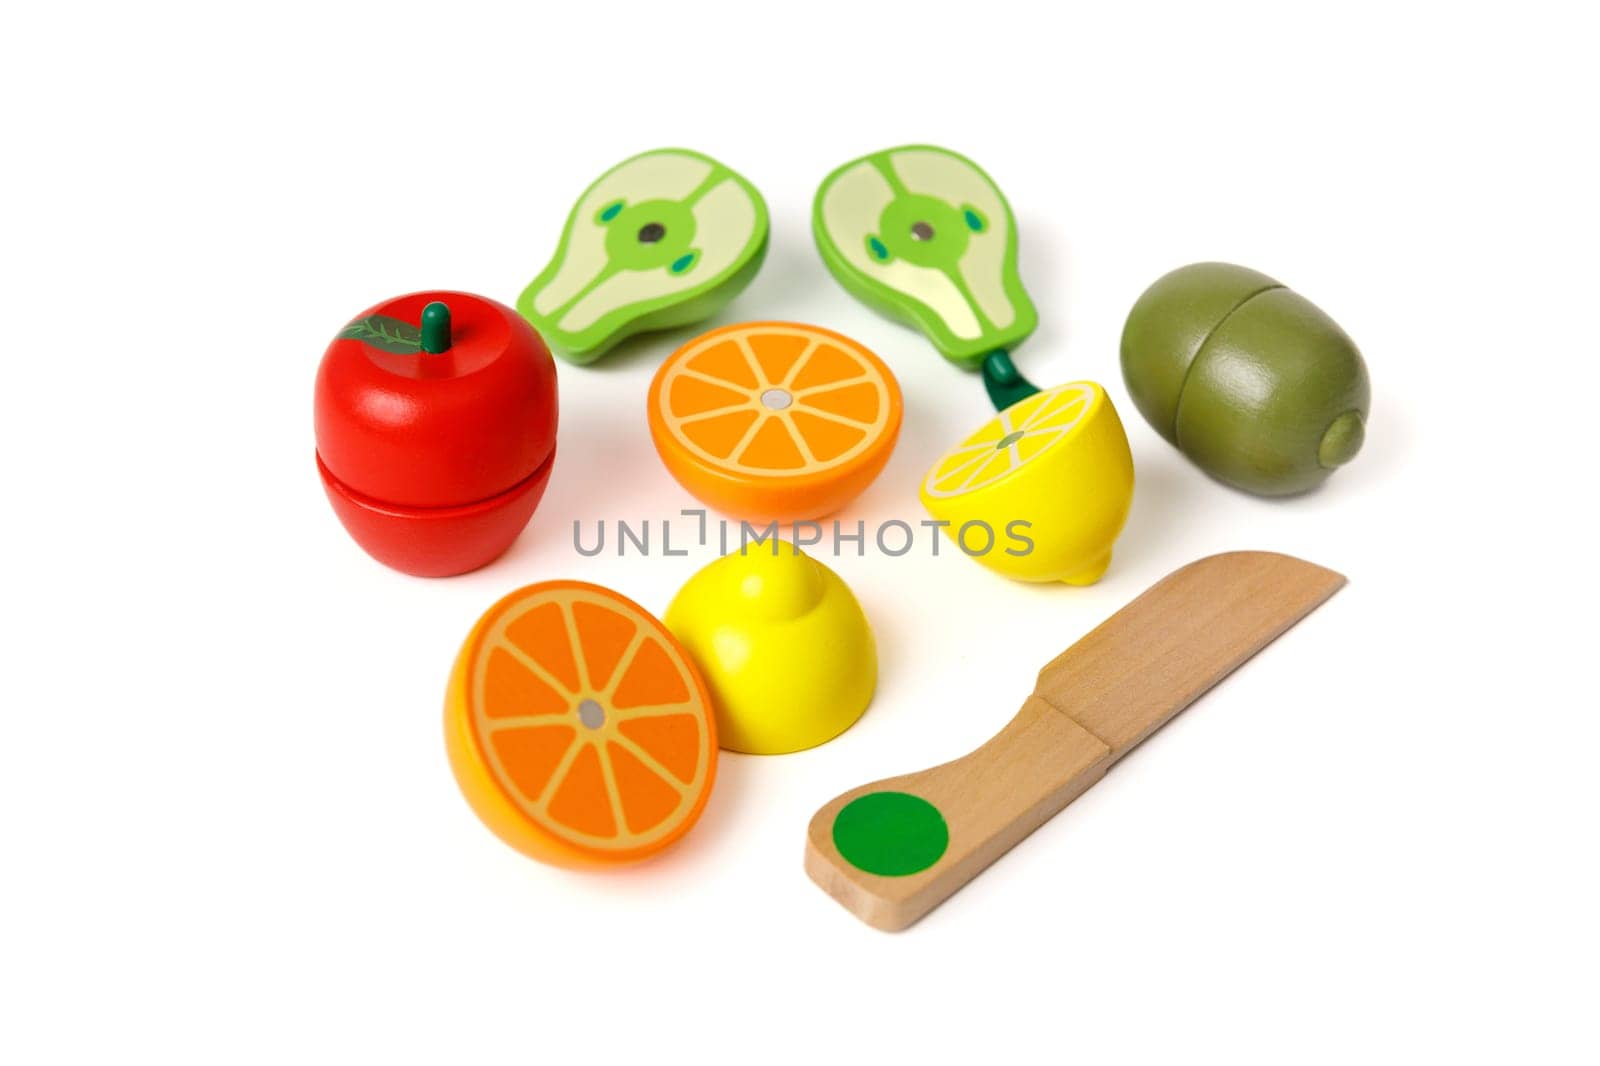 Educational children's set of toys in the form of cut fruits and a wooden knife, isolated on white background by Rom4ek